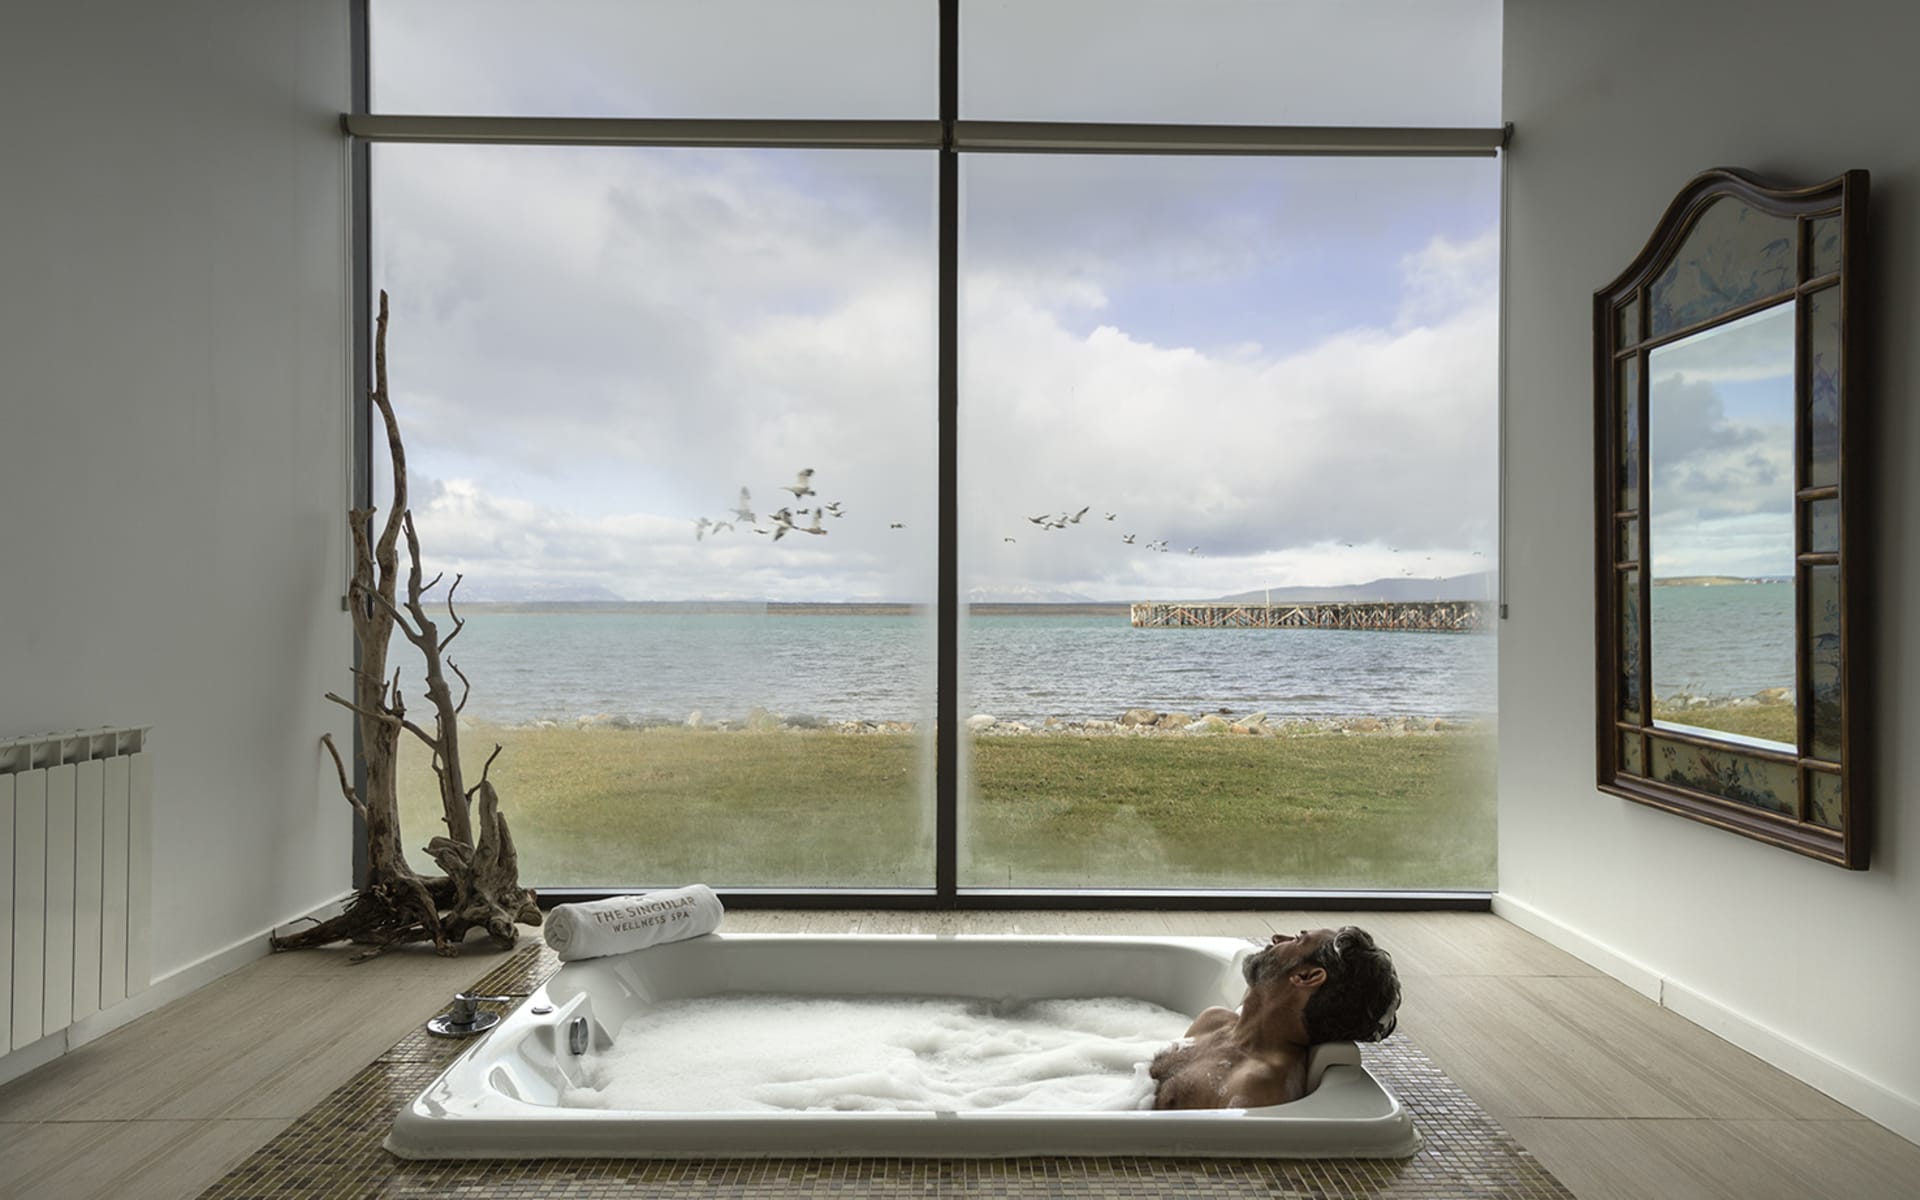 A woman sits in a hot tub looking out of floor-to-ceiling windows where a flock of birds fly outside. 